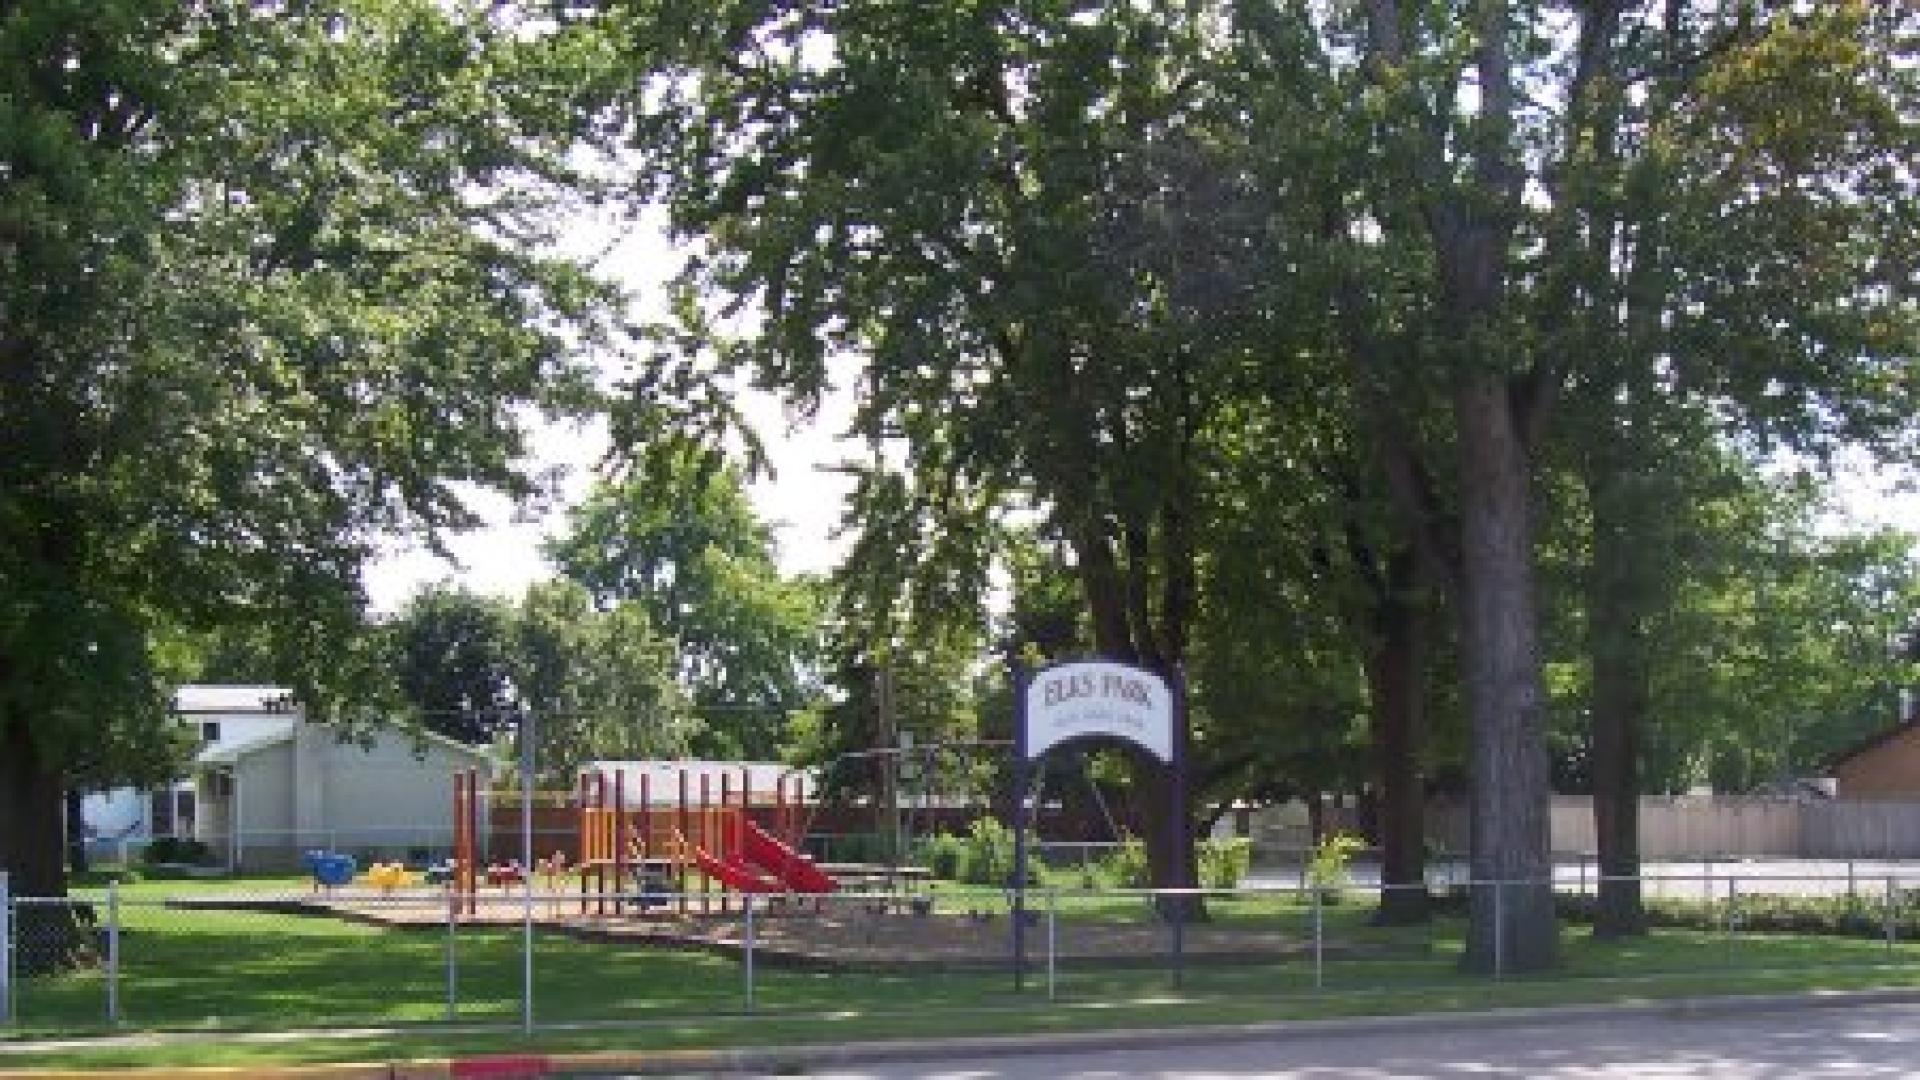 Small playground. There is signage by the entrance with the park's name on it. The playground consists of a red jungle gym.